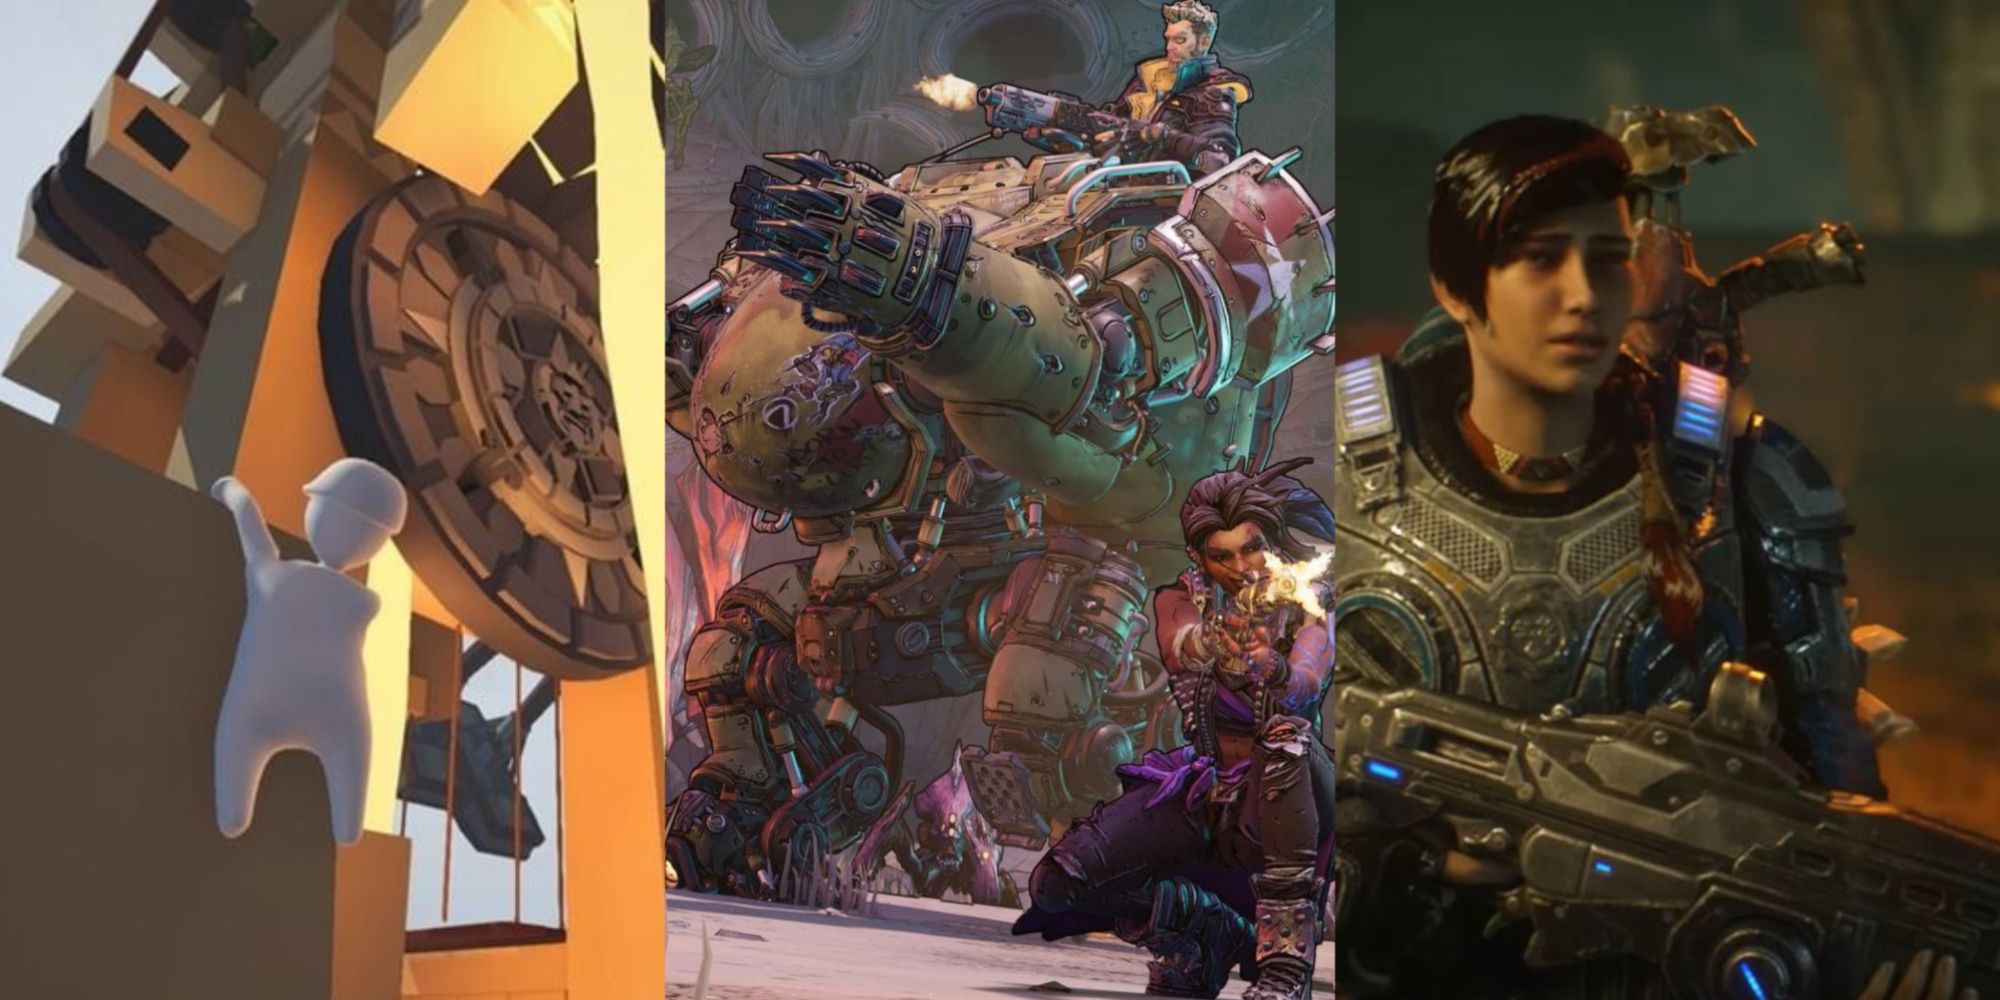 Split-Screen Multiplayer Games On Xbox Series XS Featured Split Image Human Fall Flat, Borderlands, and Gears 5